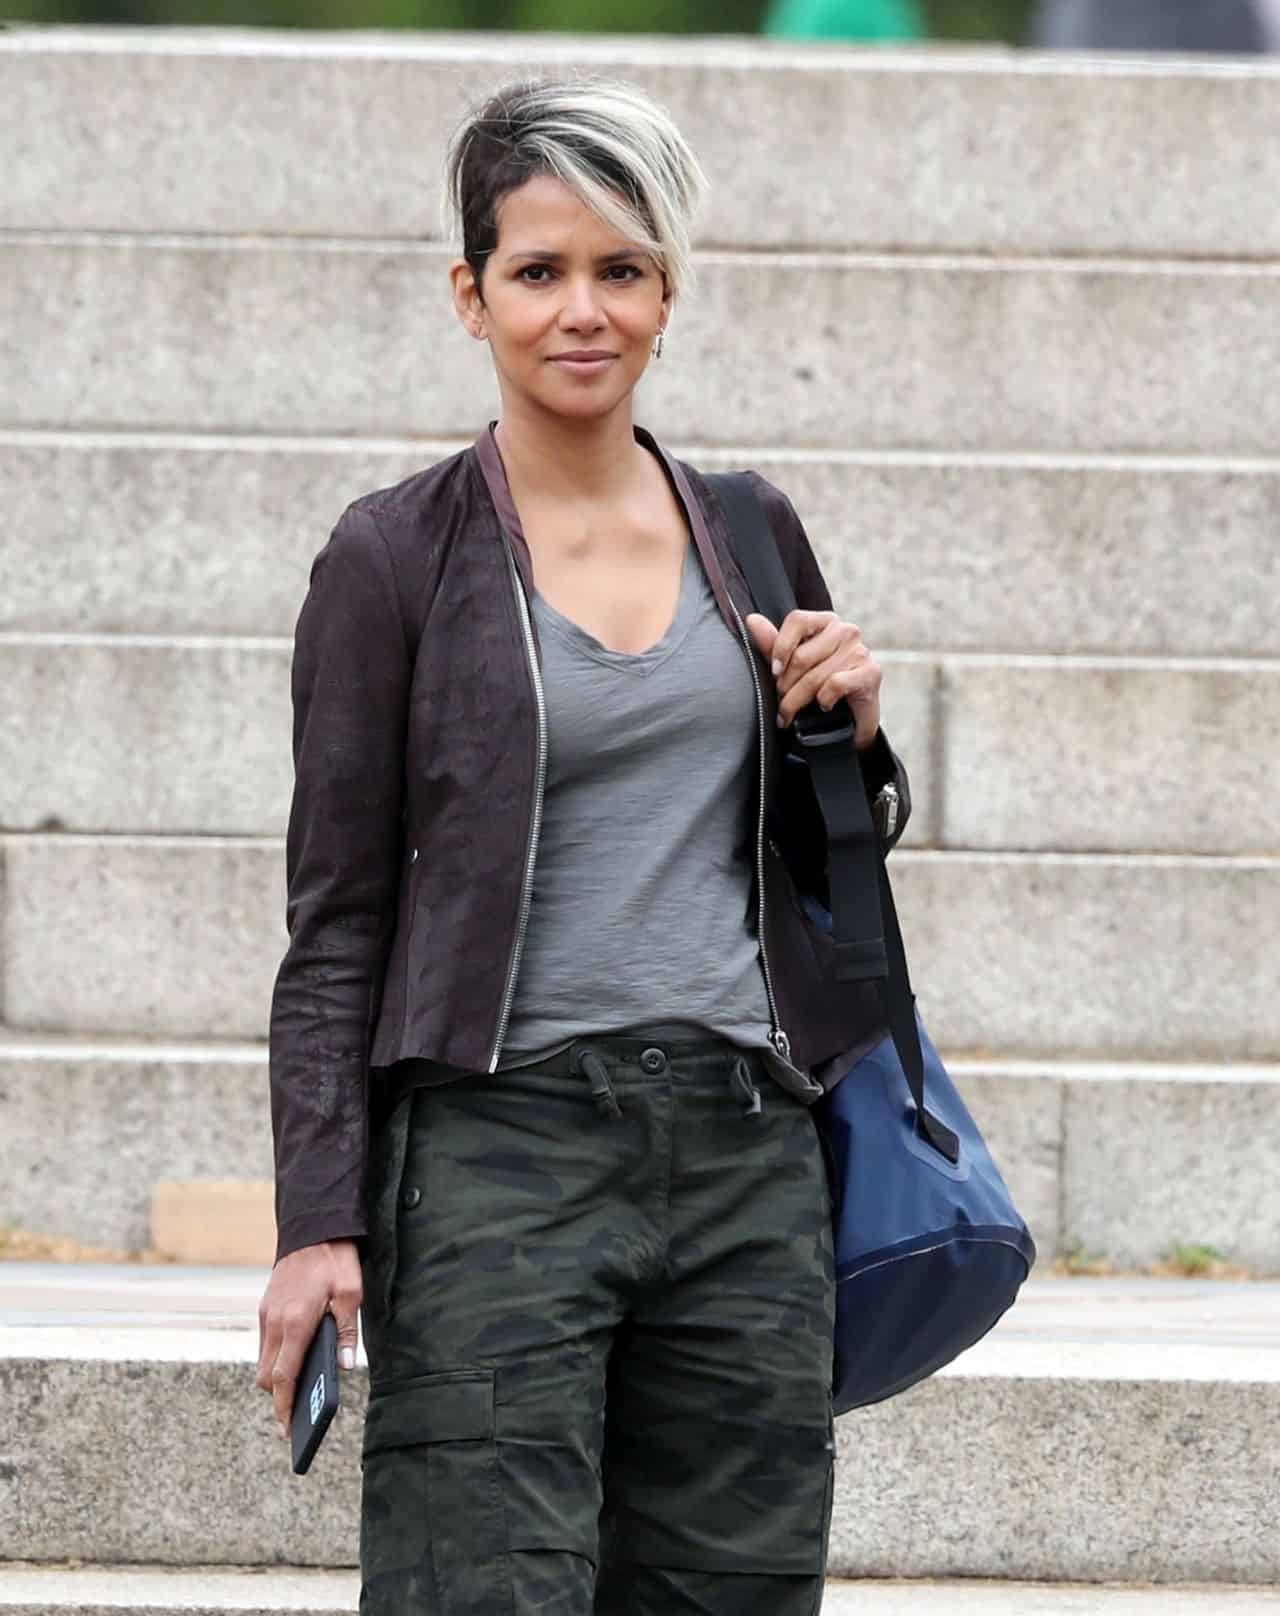 Halle Berry Looks Great on the Set of Her New Movie “Our Man from Jersey”